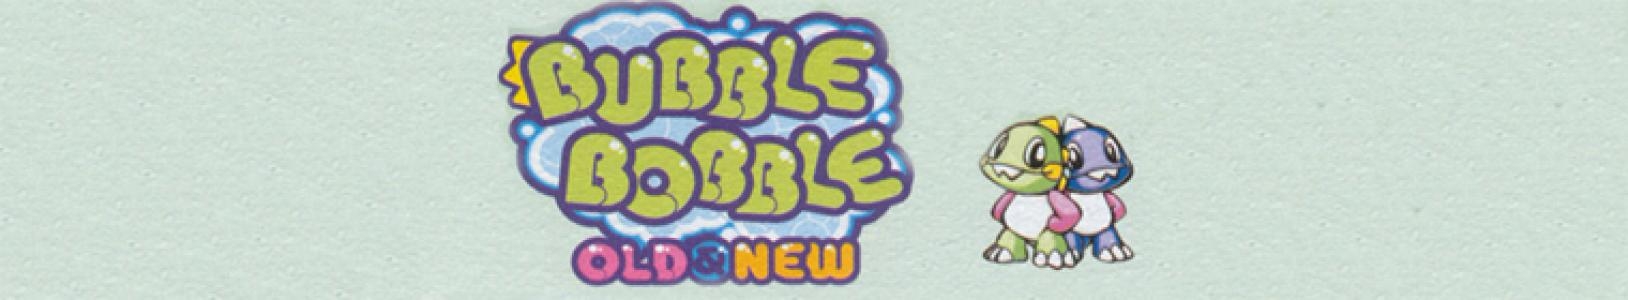 Bubble Bobble: Old & New banner